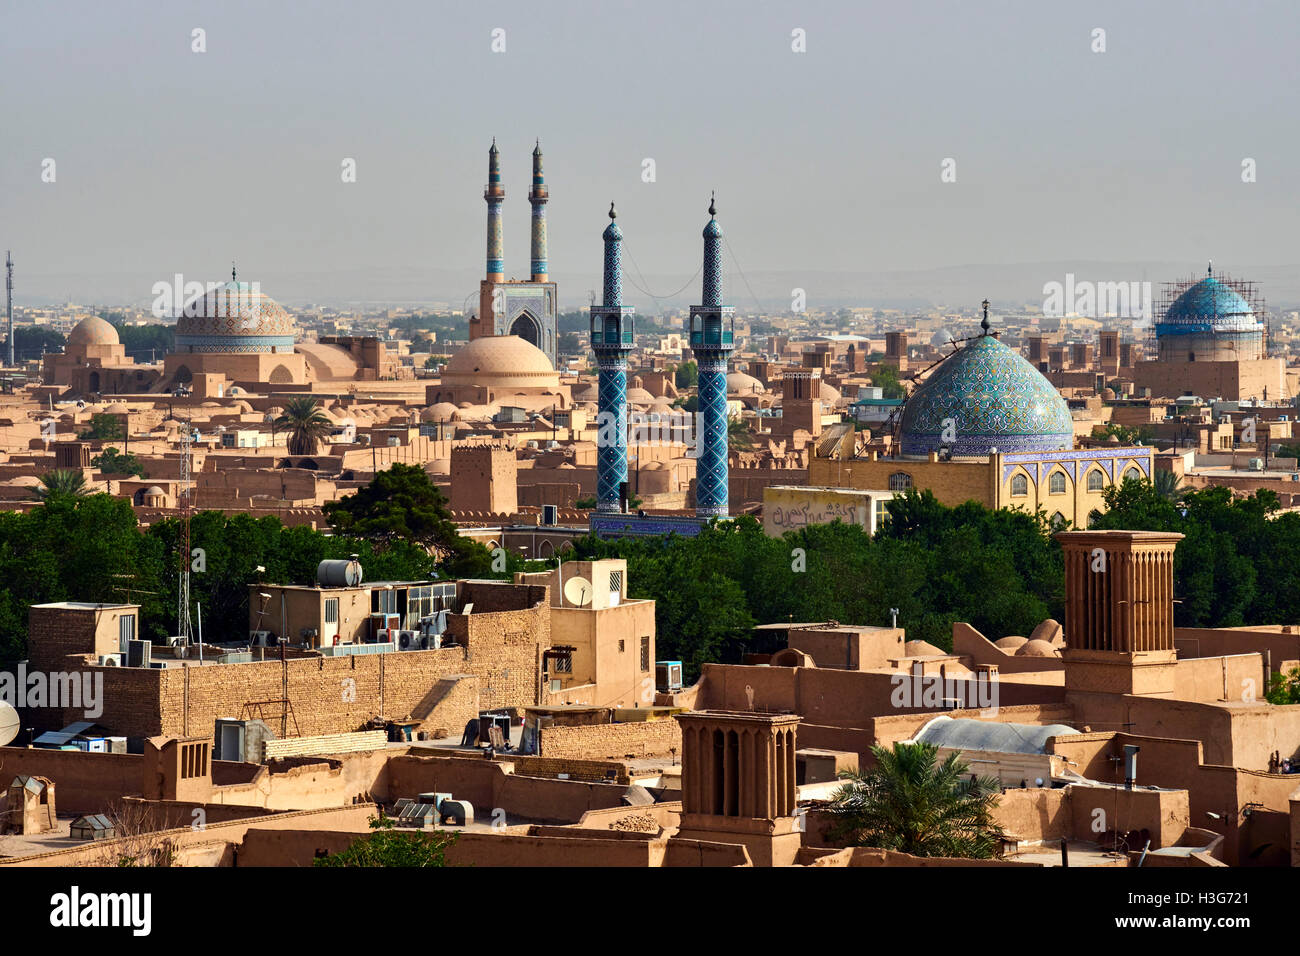 Iran, Yazd province, Yazd, Friday mosque, cityscape, badgirs or wind towers Stock Photo